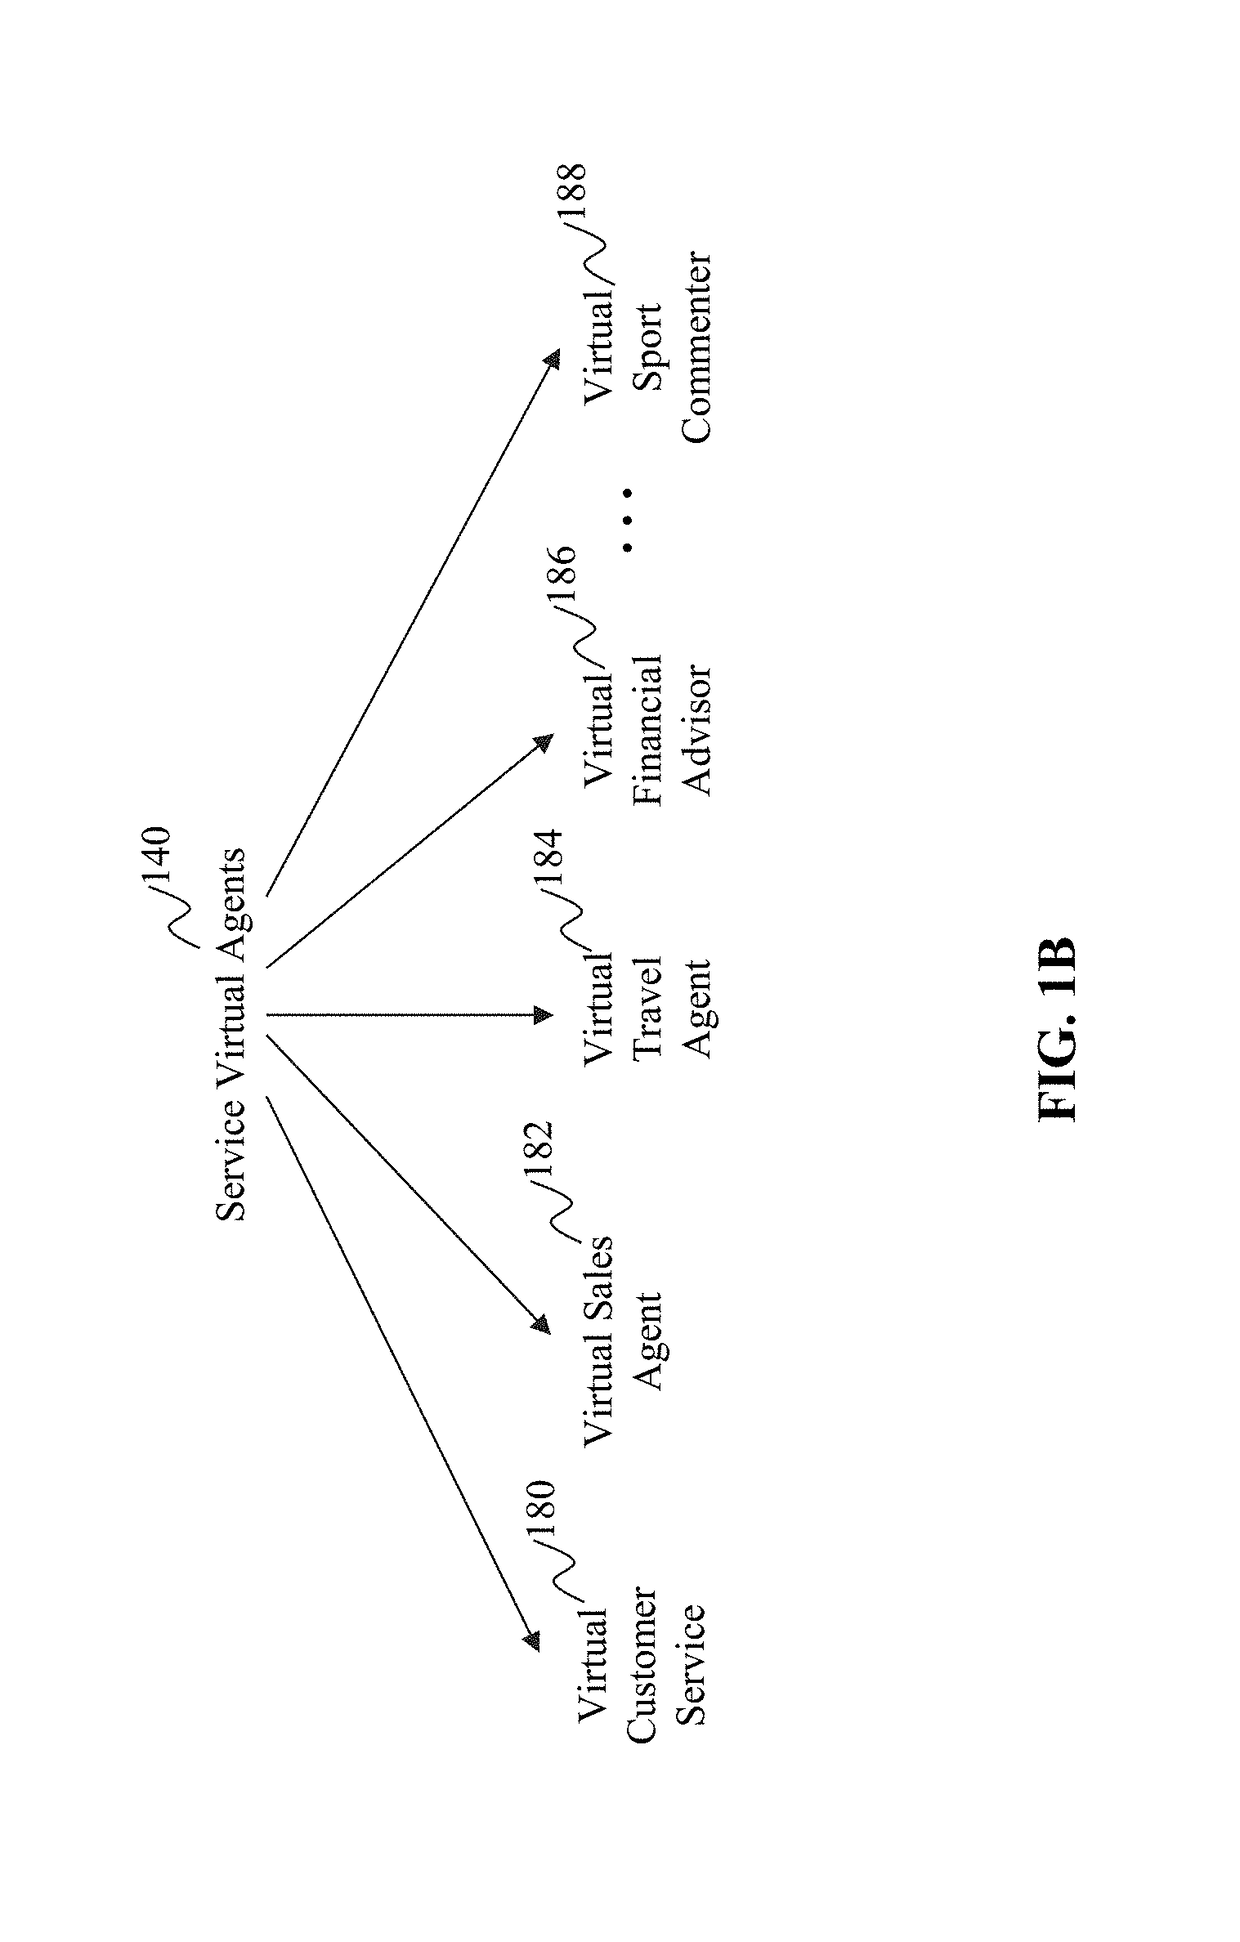 Method and system for context sensitive intelligent virtual agents